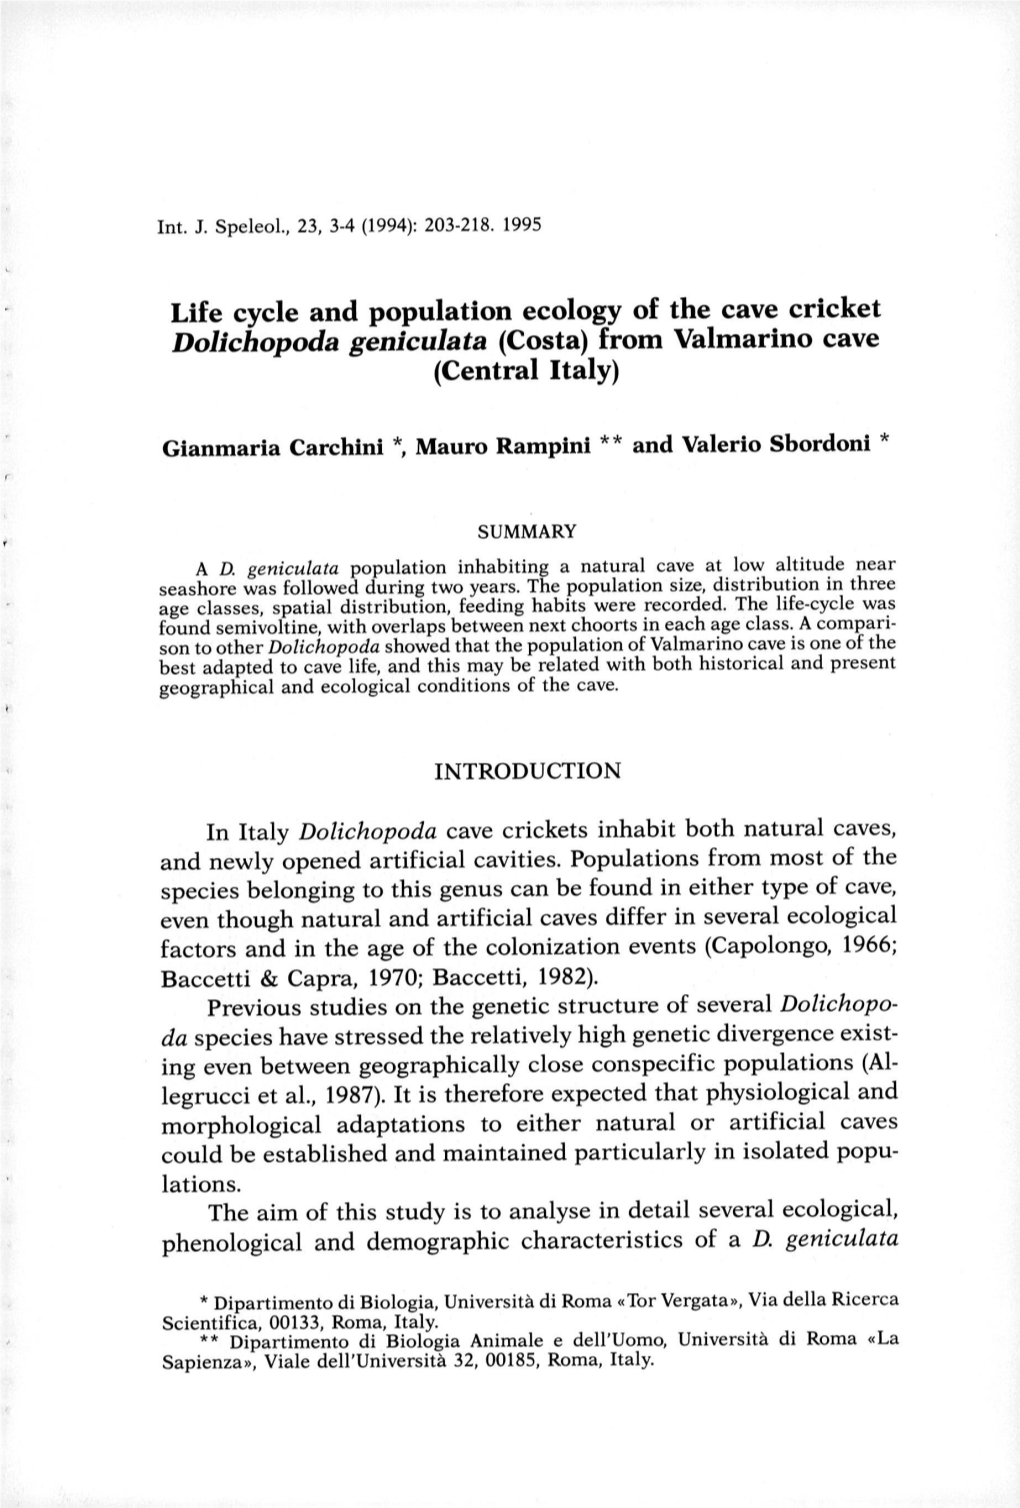 Life Cycle and Population Ecology of the Cave Cricket Dolichopoda Geniculata (Costa) from Valmarino Cave (Central Italy)